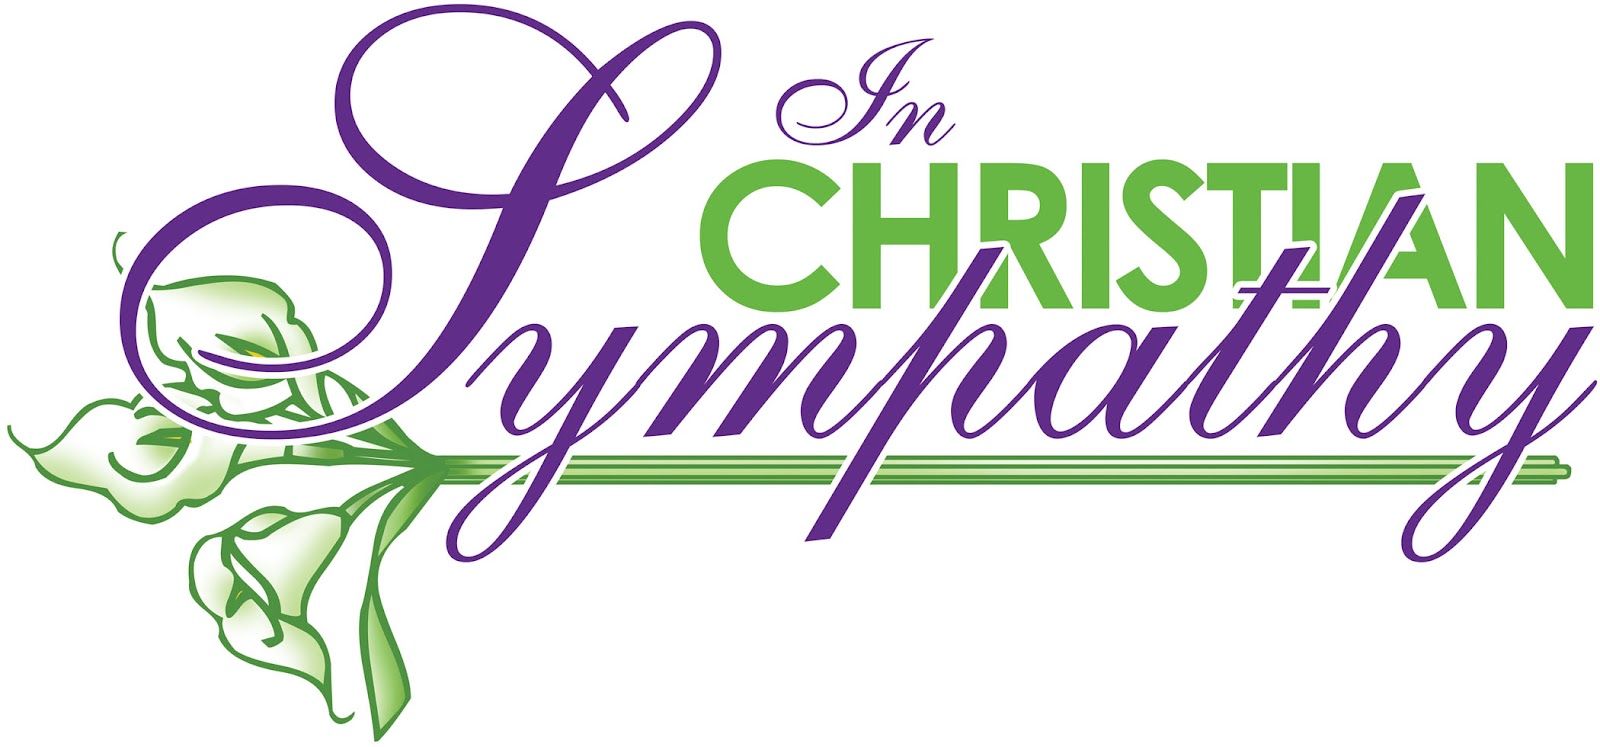 free christian funeral clipart - photo #2